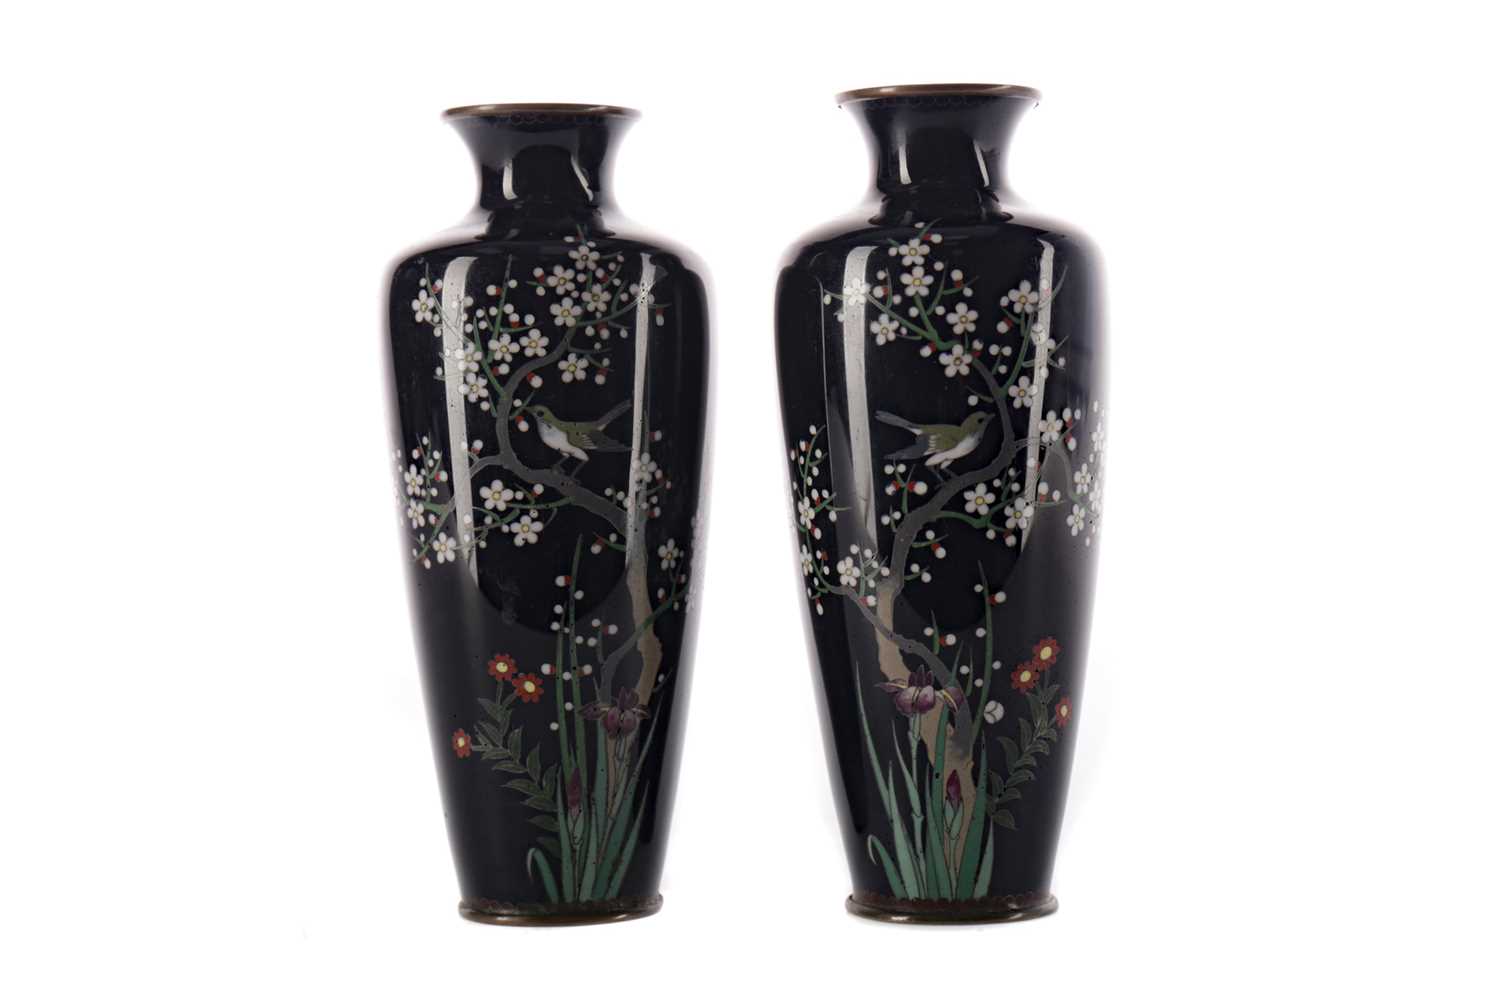 Lot 797 - A PAIR OF EARLY 20TH CENTURY JAPANESE CLOISONNE ENAMEL VASES